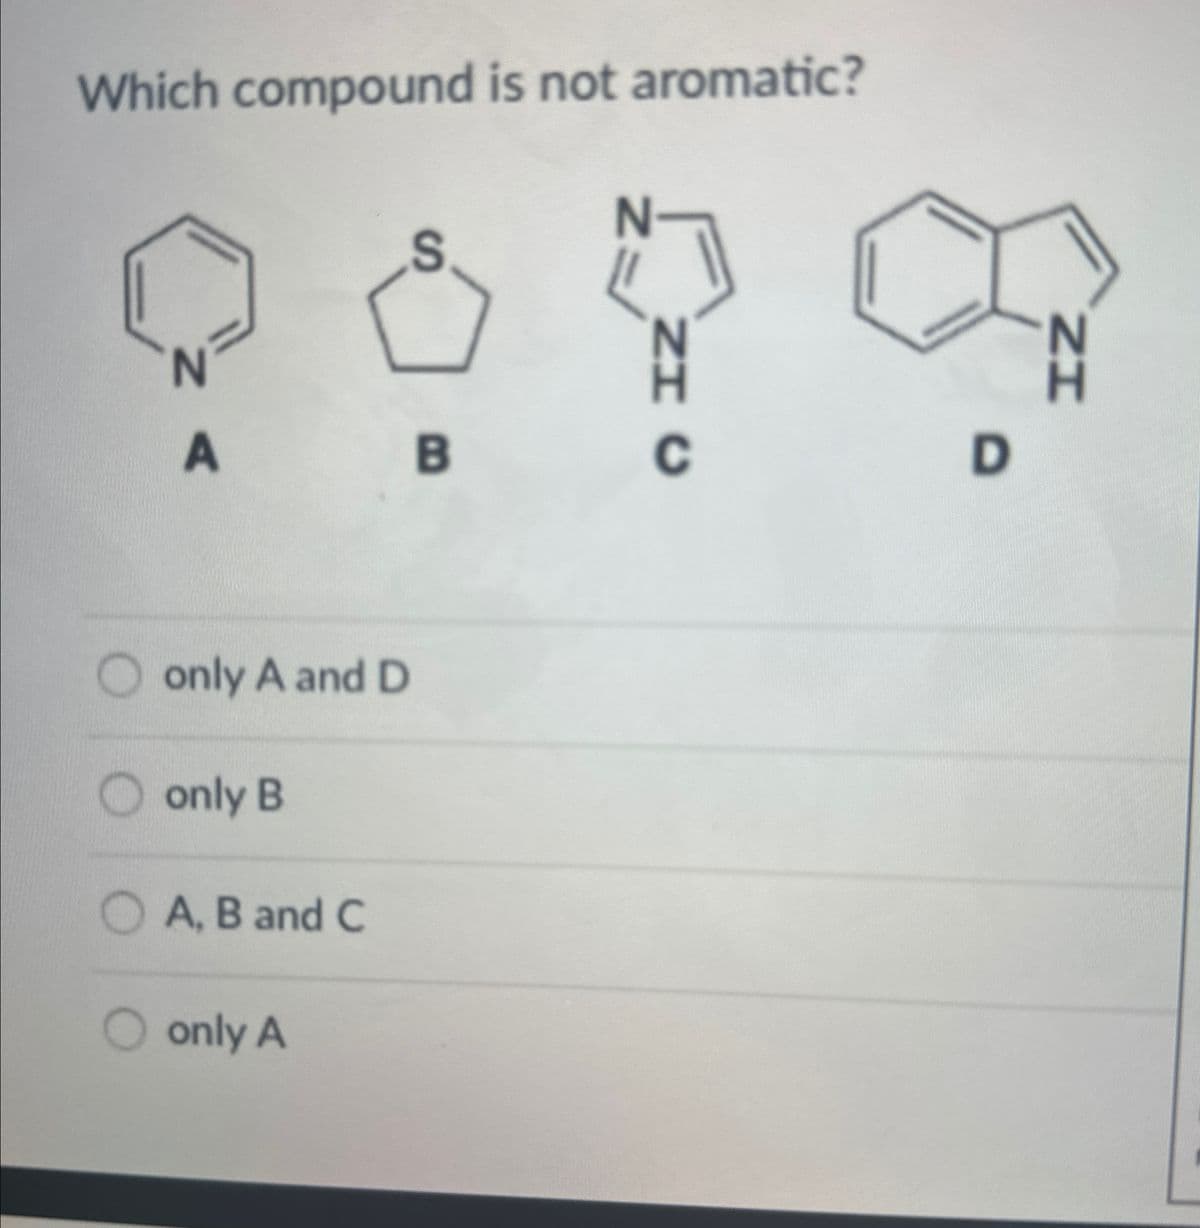 Which compound is not aromatic?
N
S
A
B
NHC
N
only A and D
only B
A, B and C
only A
NH
D